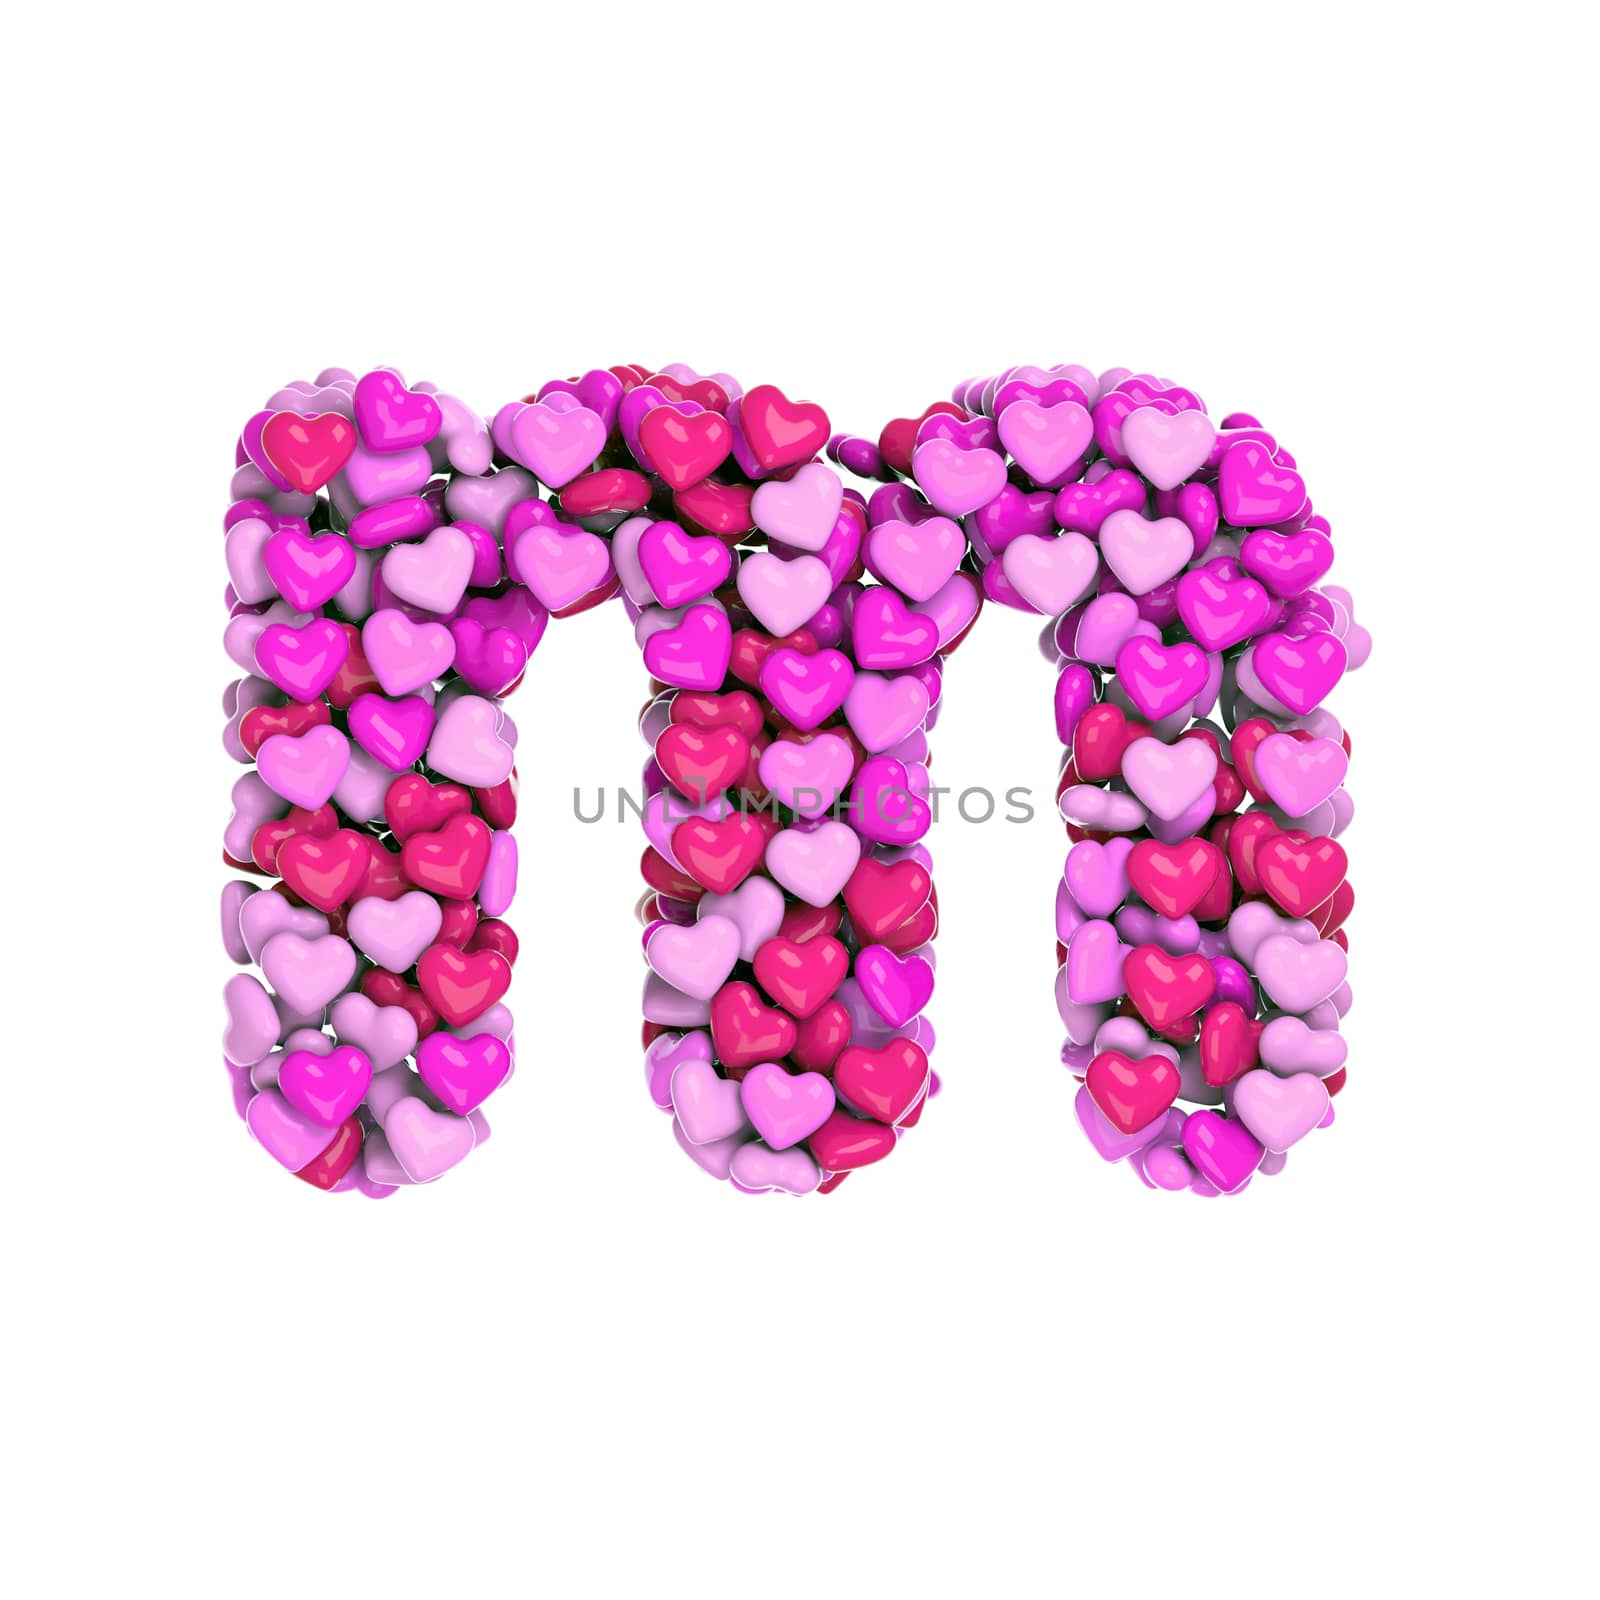 Valentine letter M - Lowercase 3d pink hearts font - Love, passion or wedding concept by chrisroll